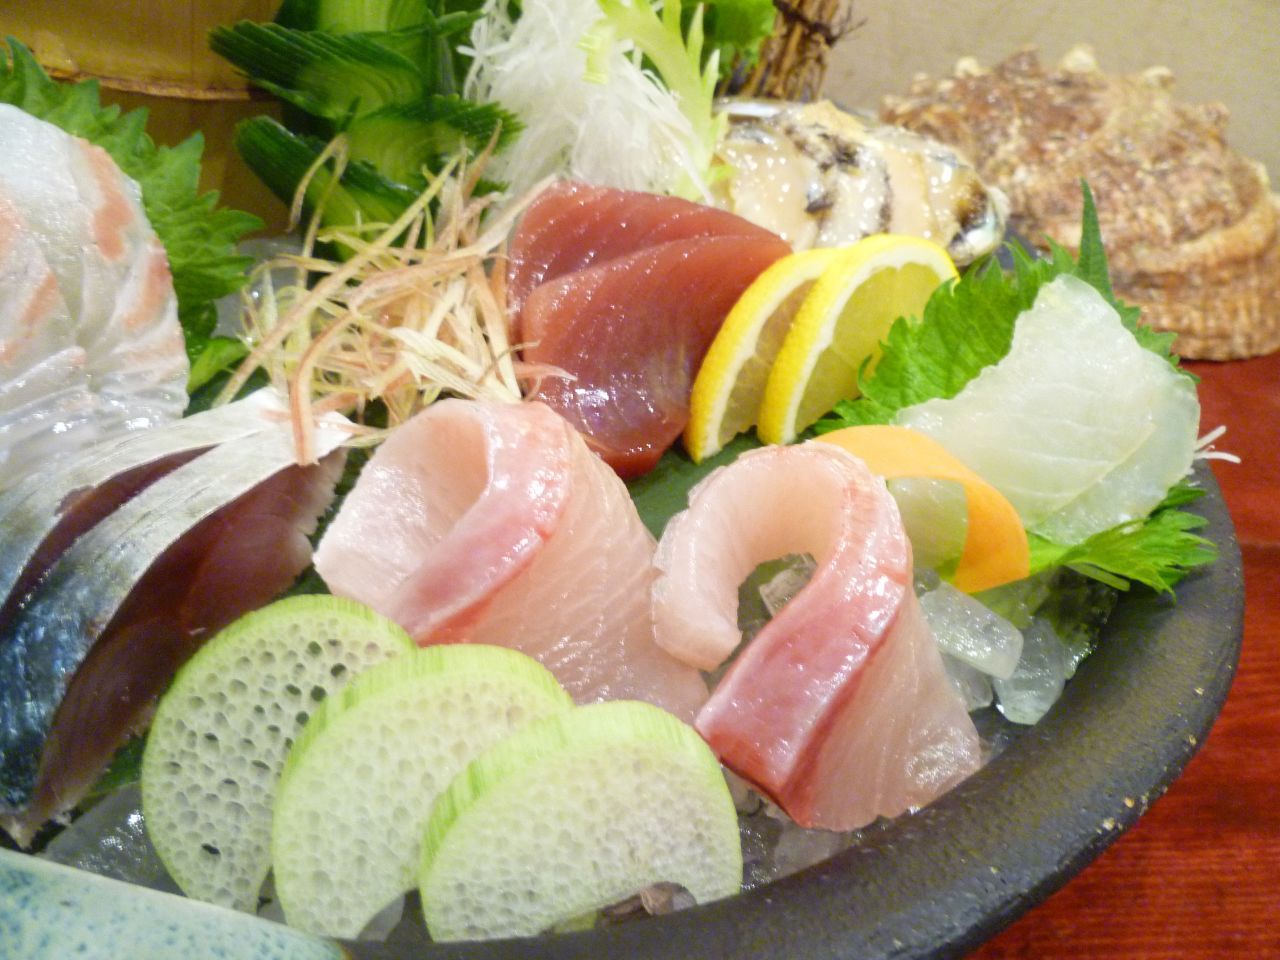 No trip to Japan would be complete without sampling the range of culinary delights the country has to offer. Sashimi -- sliced raw fish -- is a national delicacy. 